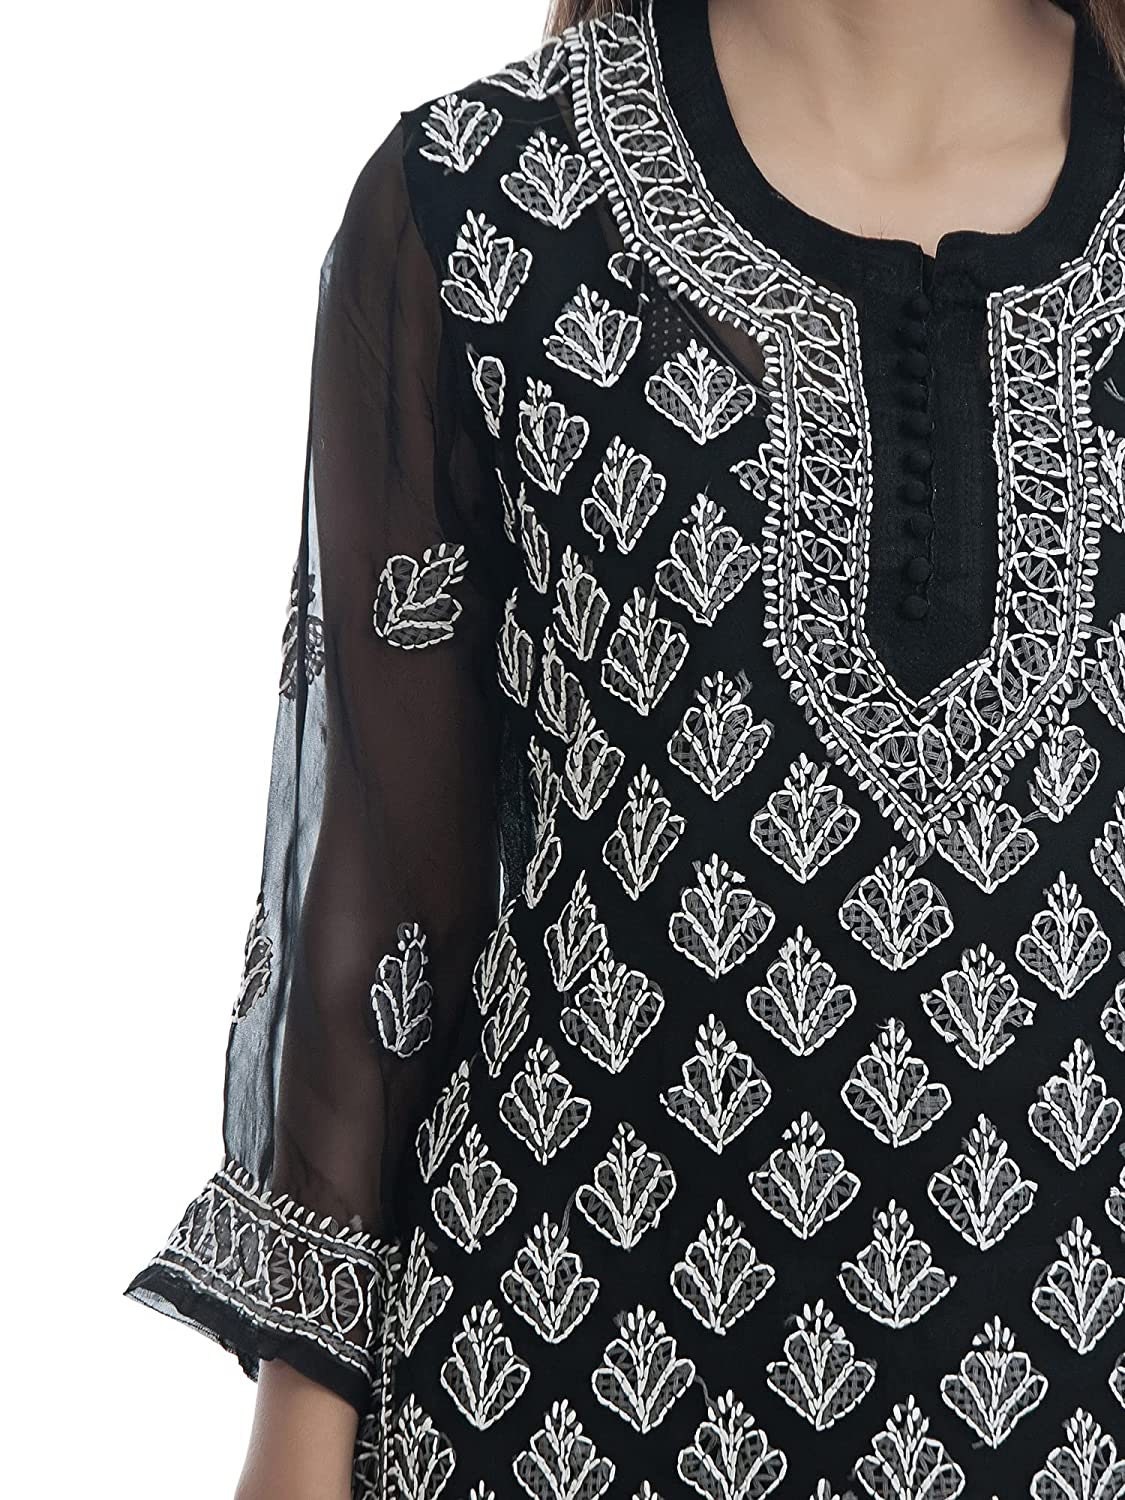 Ada Floral Indian Chikankari Designer Georgette KURTA WITH SLIP Authentic  Chikan Thread Hand Embroidery, Ethnic Wear Tops for Ladies Women - Etsy |  Dress indian style, Simple kurta designs, Kurta designs